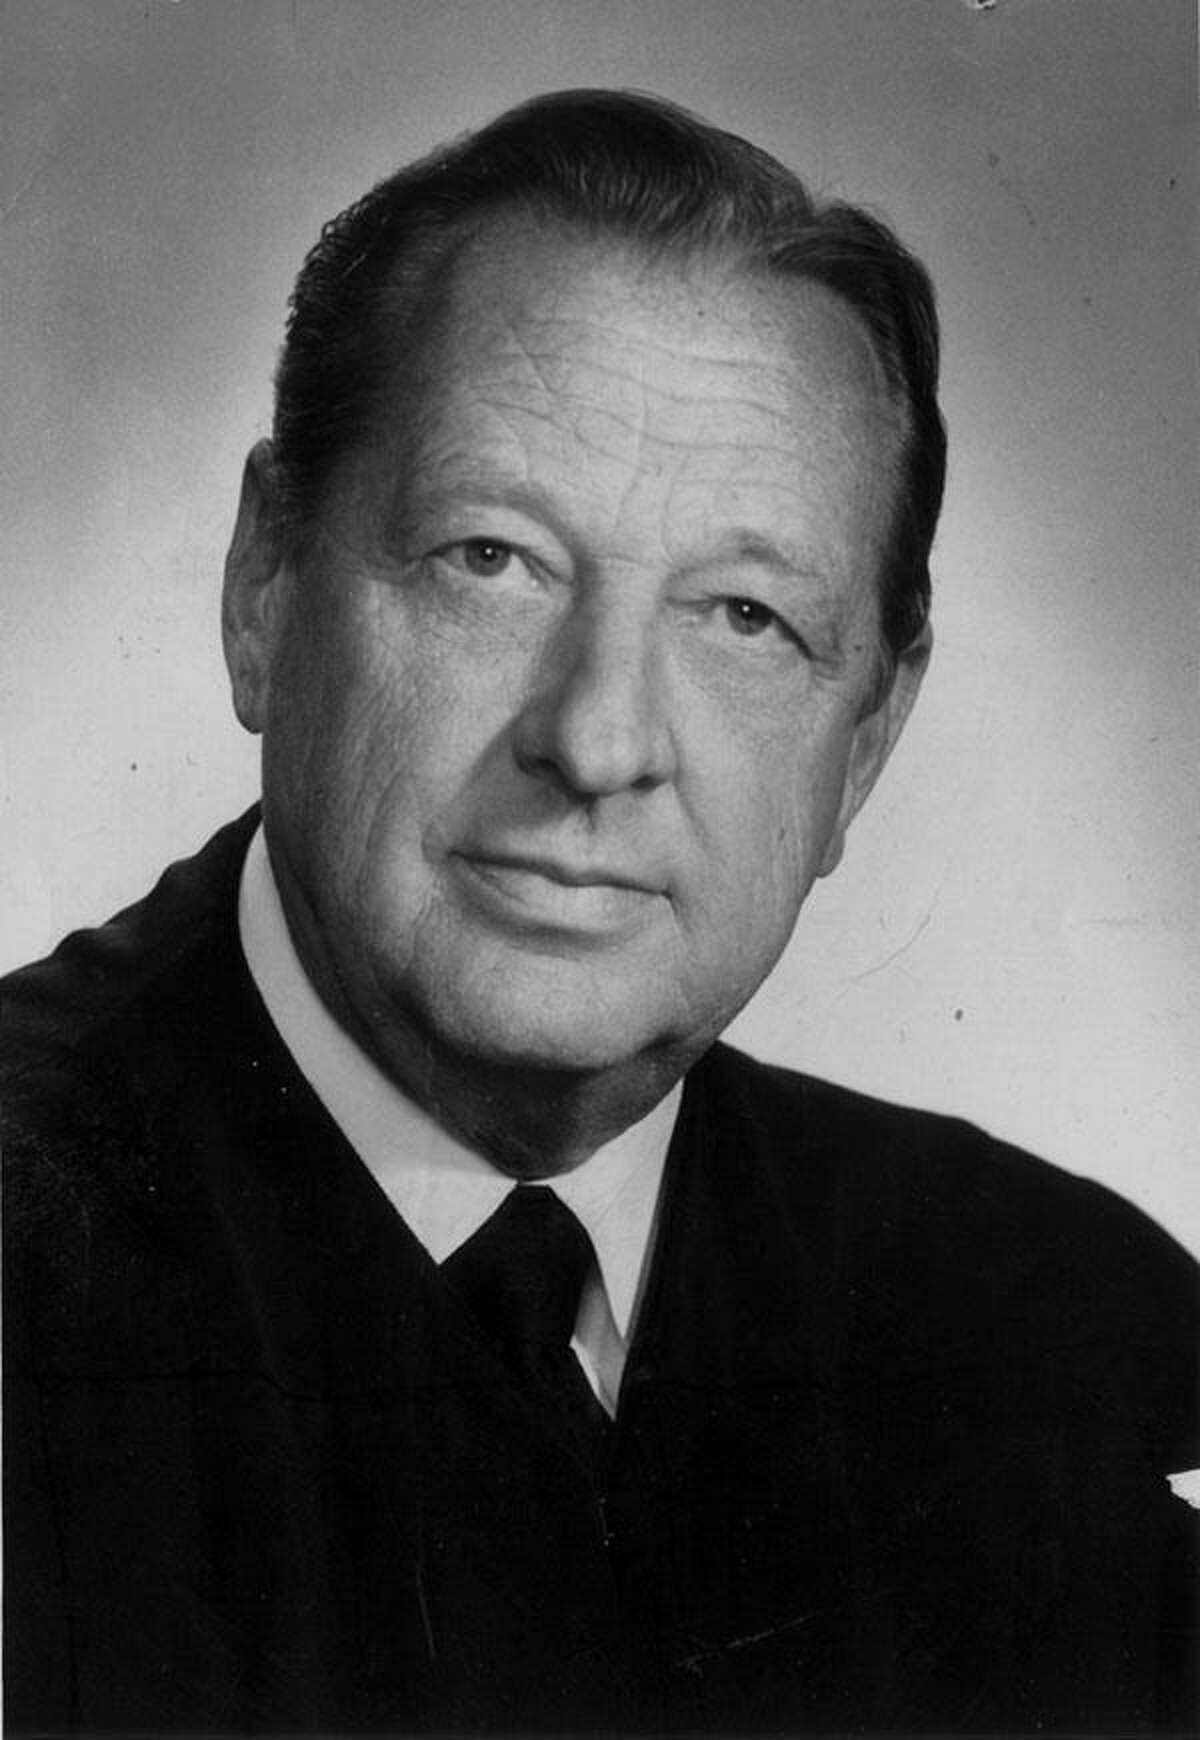 U.S. District Judge John H. Wood was assassinated in San Antonio May 29, 1979, by Charles Harrelson.